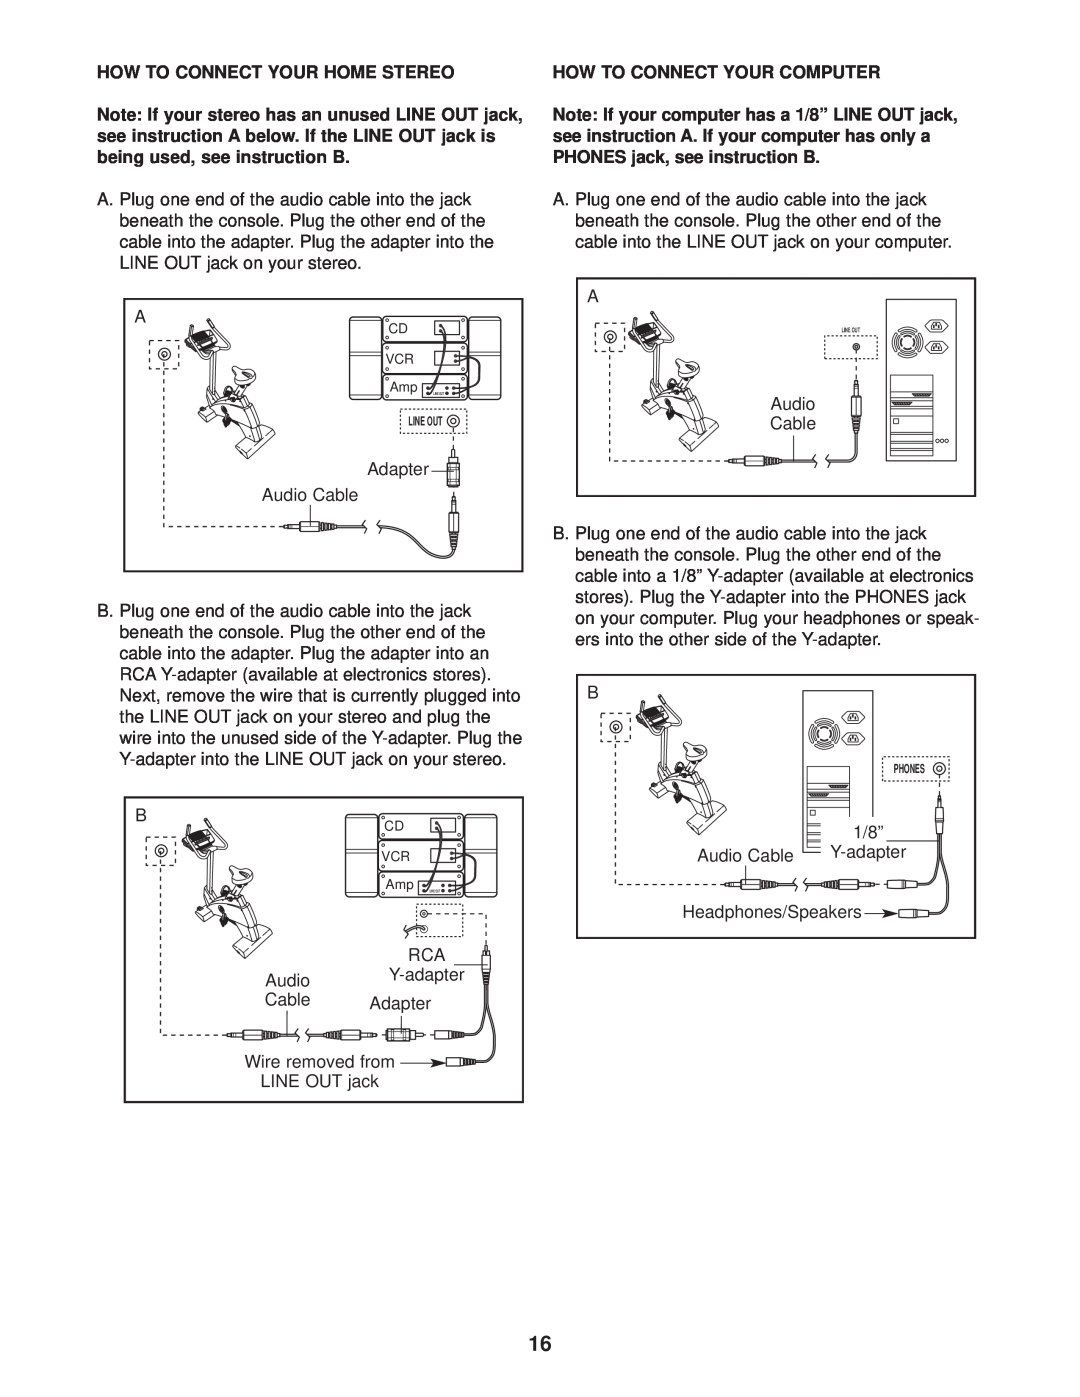 Reebok Fitness RBEX49020 manual How To Connect Your Home Stereo, How To Connect Your Computer, Amp LINE OUT, Line Out 